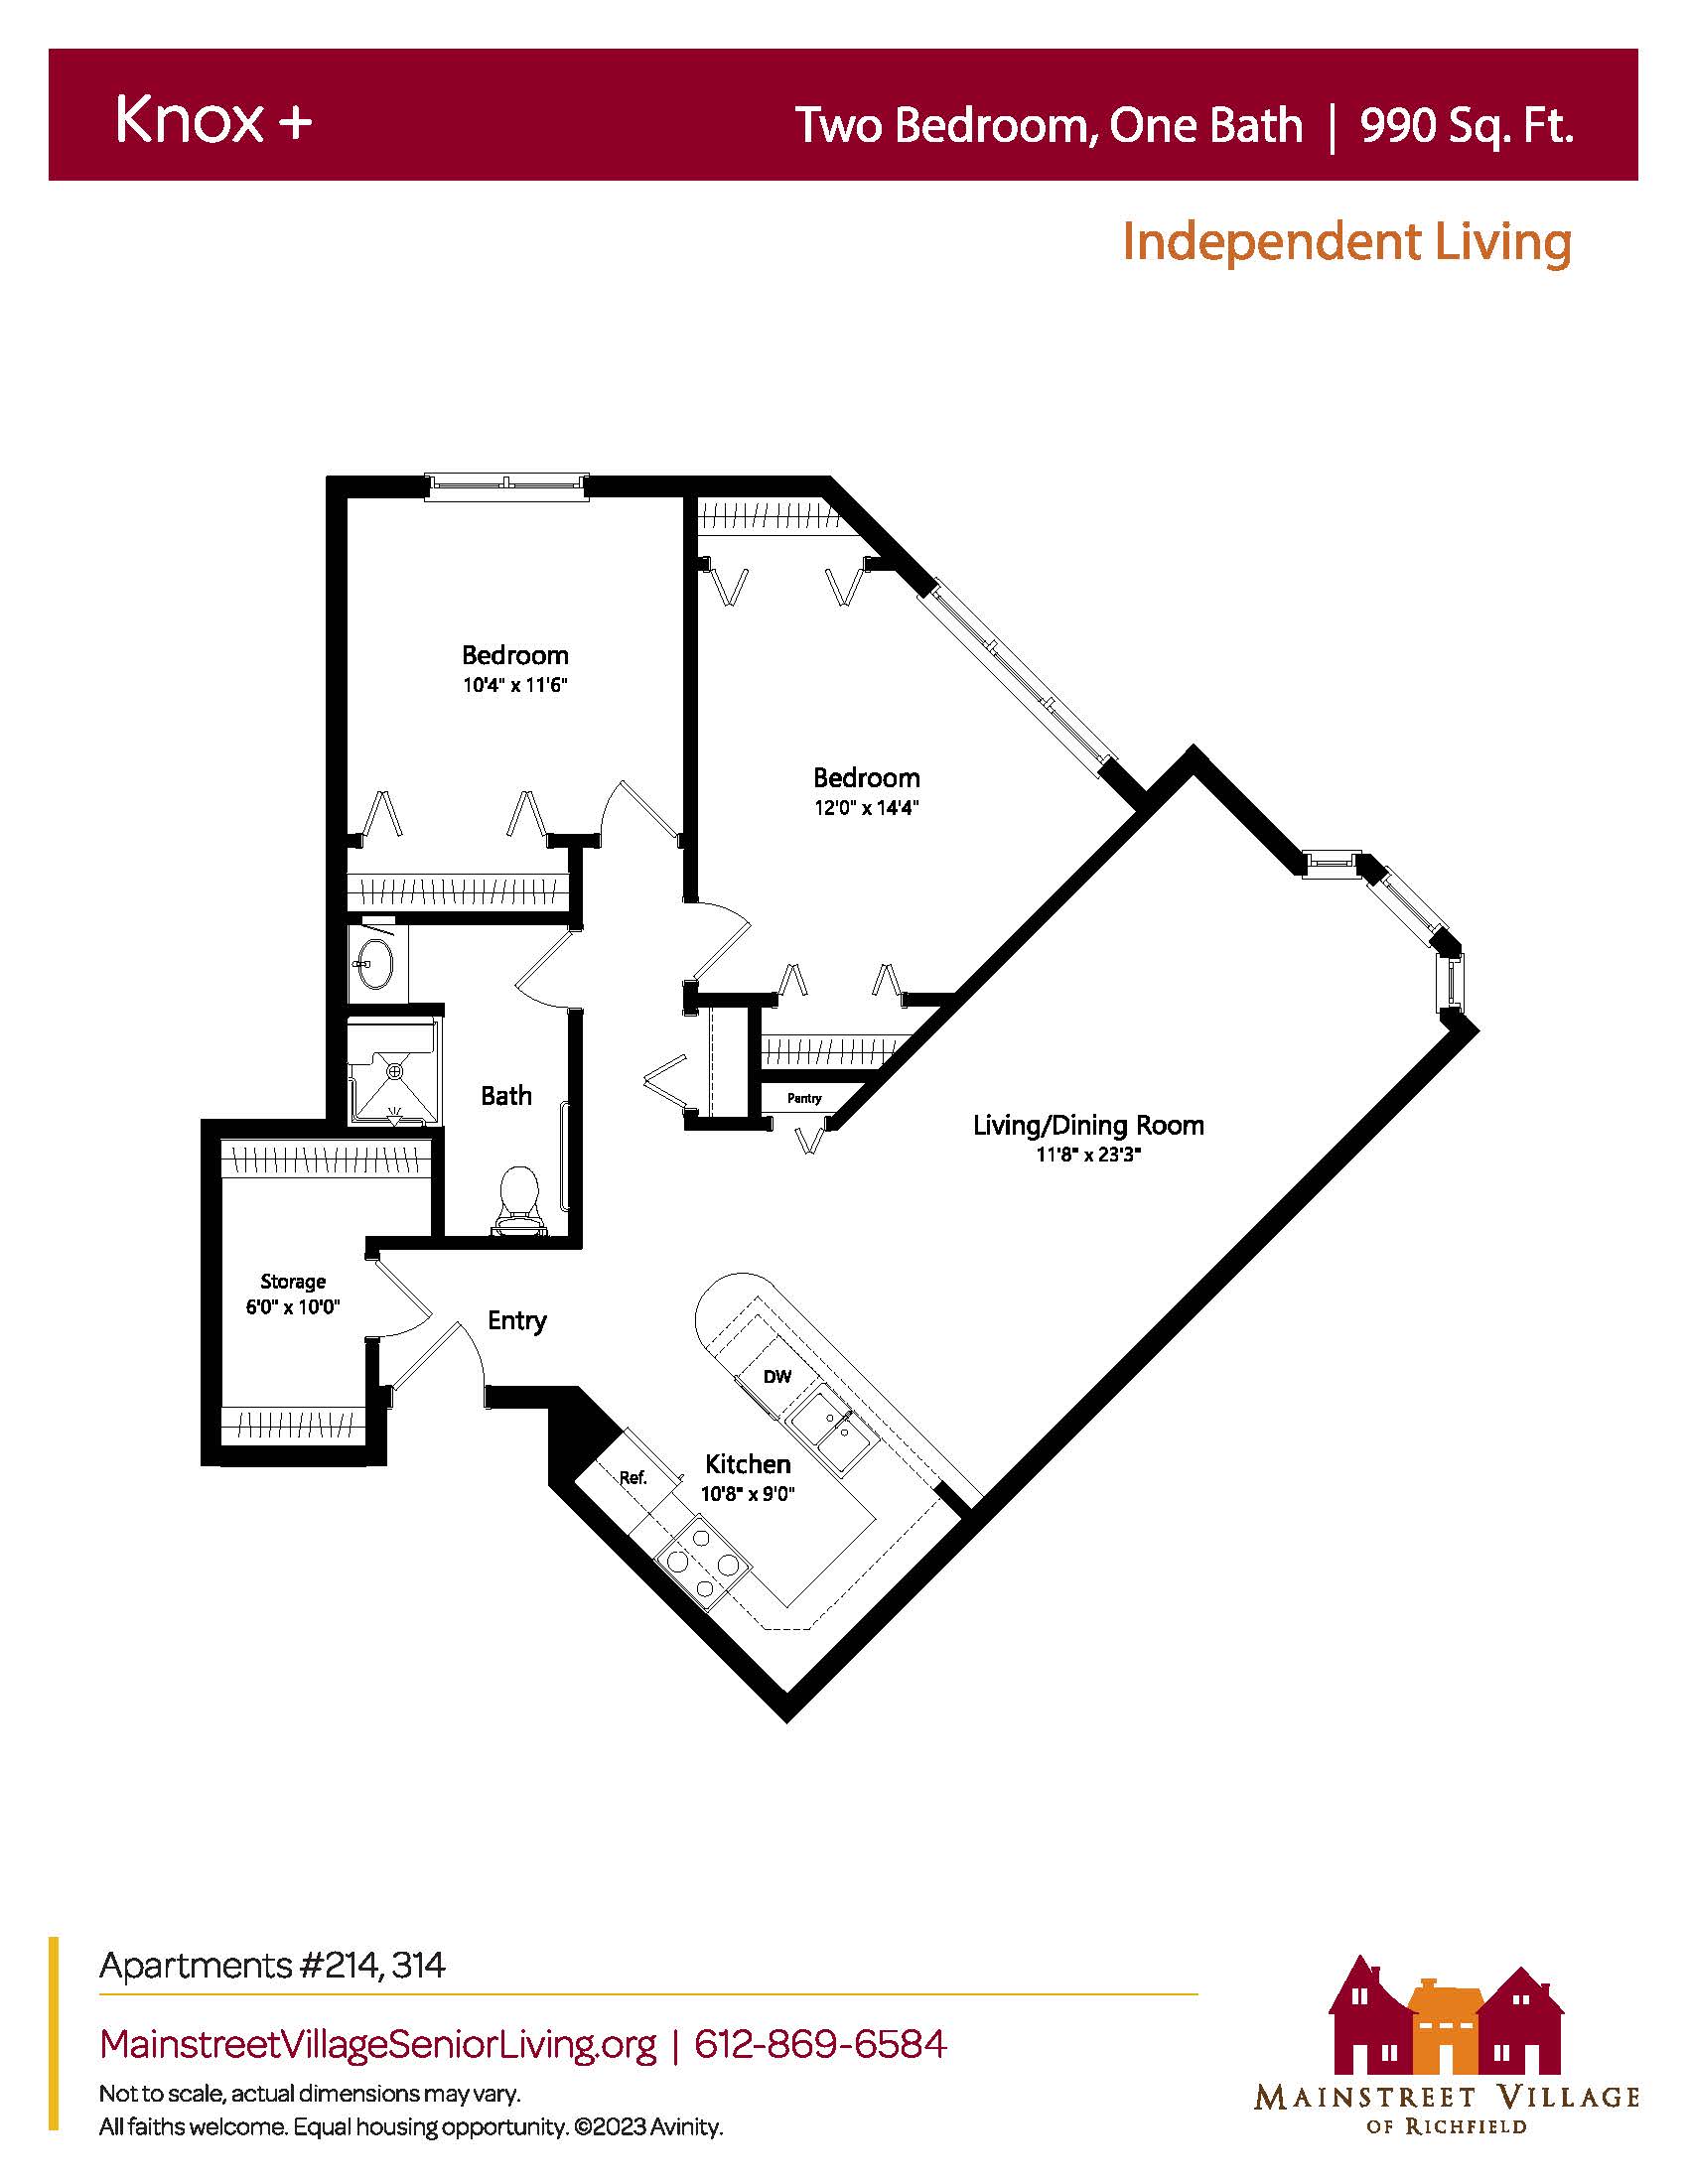 Floor plan for Knox+